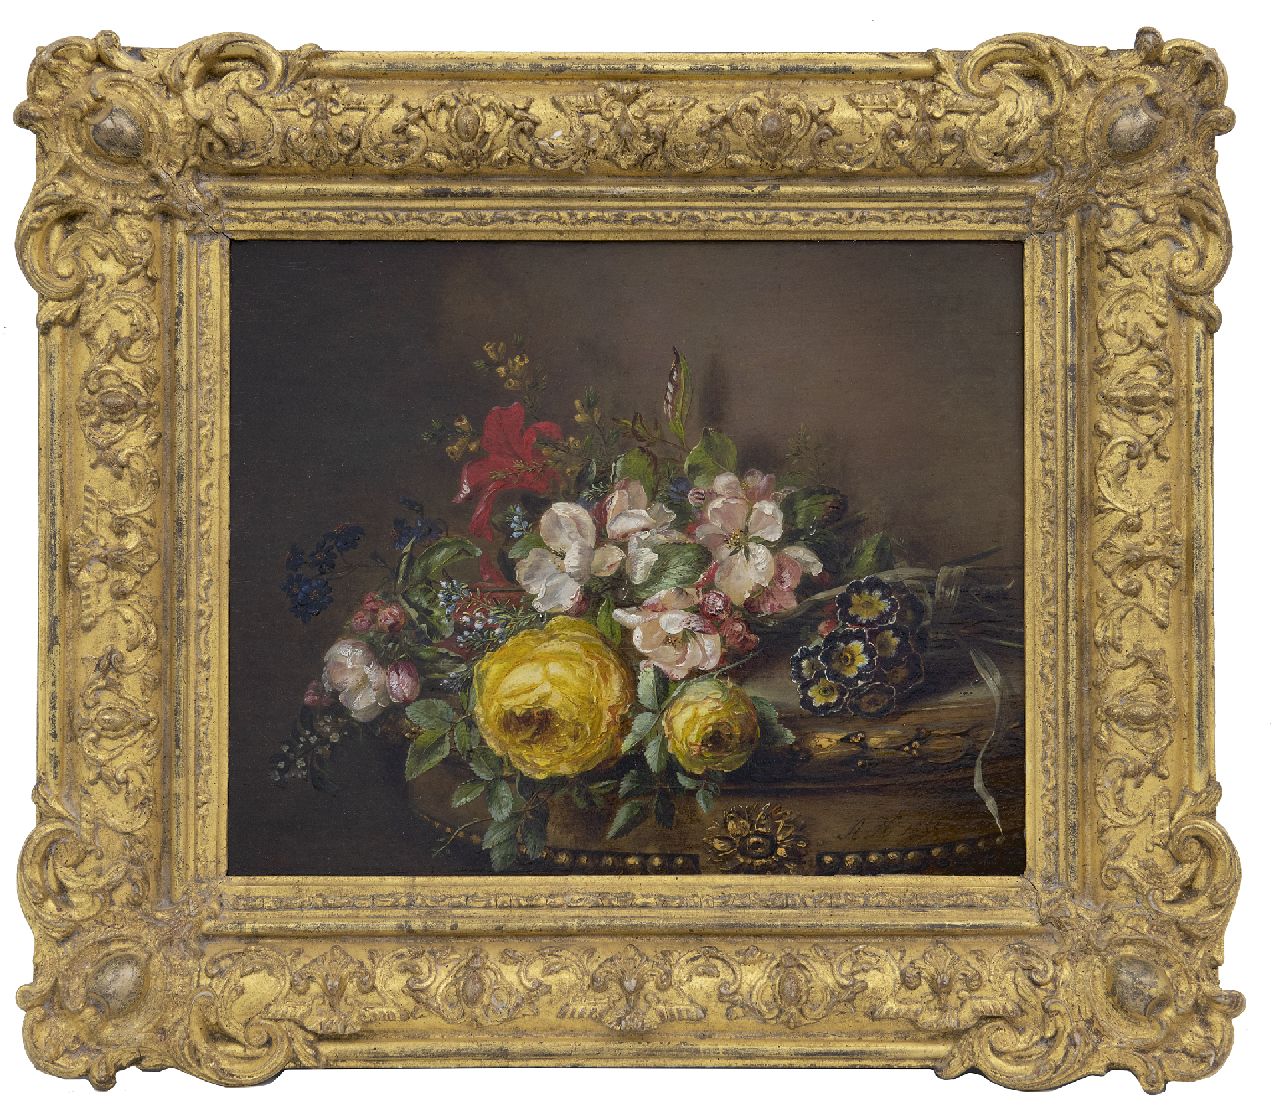 Haanen A.J.  | Adriana Johanna Haanen | Paintings offered for sale | Mixed bouquet on a table, oil on panel 26.5 x 33.2 cm, signed l.r. and dated 1850